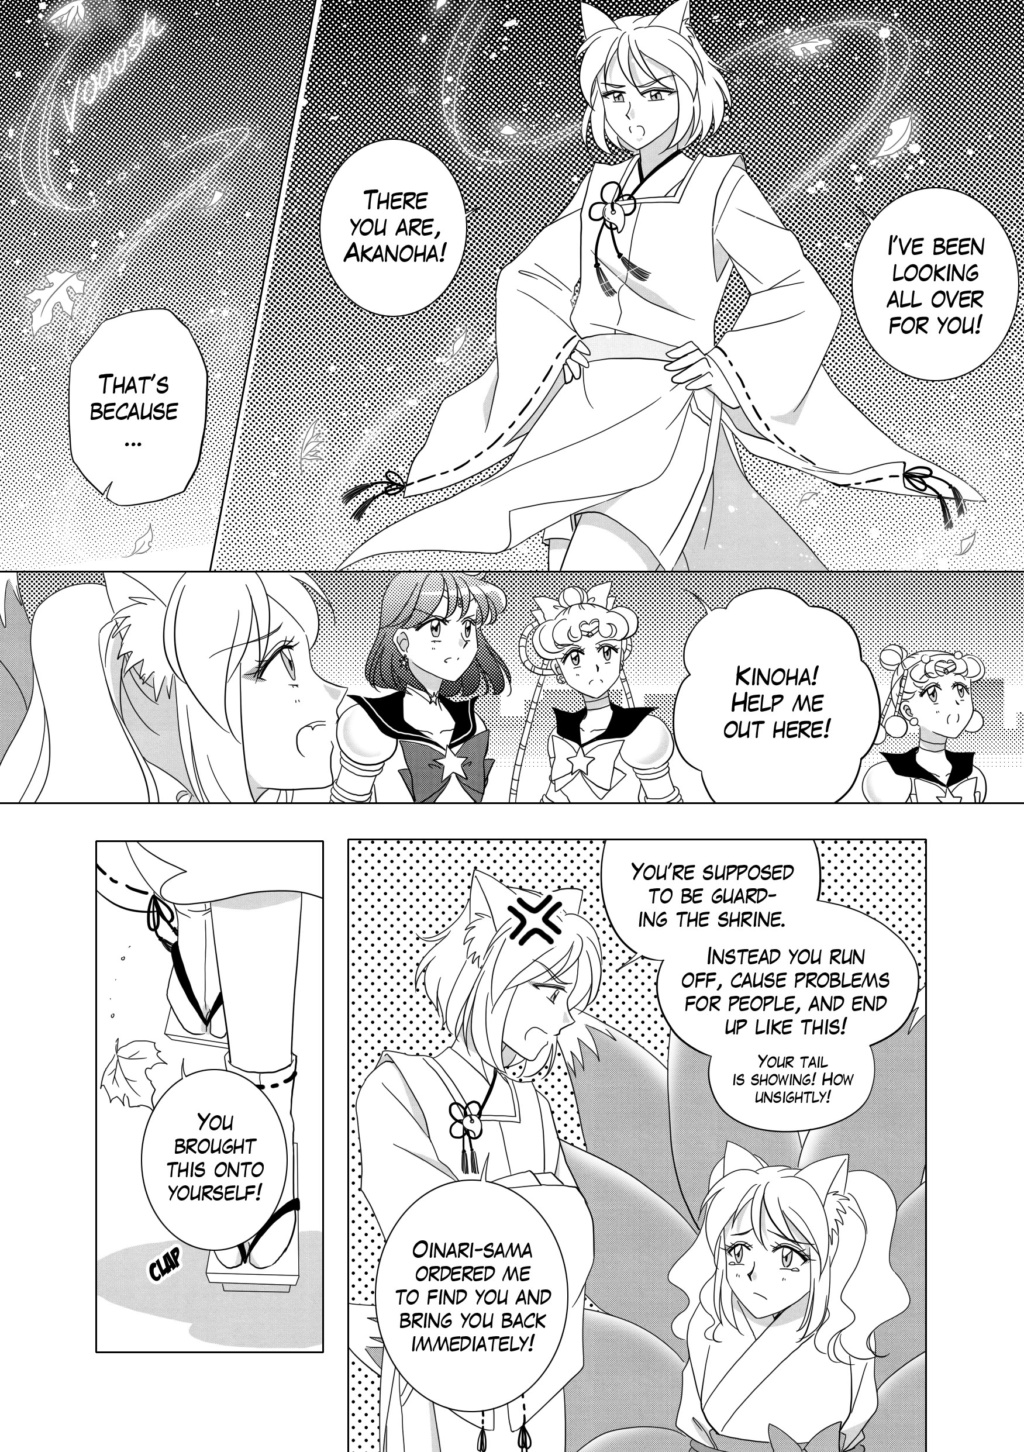 [F] My 30th century Chibi-Usa x Helios doujinshi project: UPDATED 11-25-18 - Page 19 Sbs_pg33